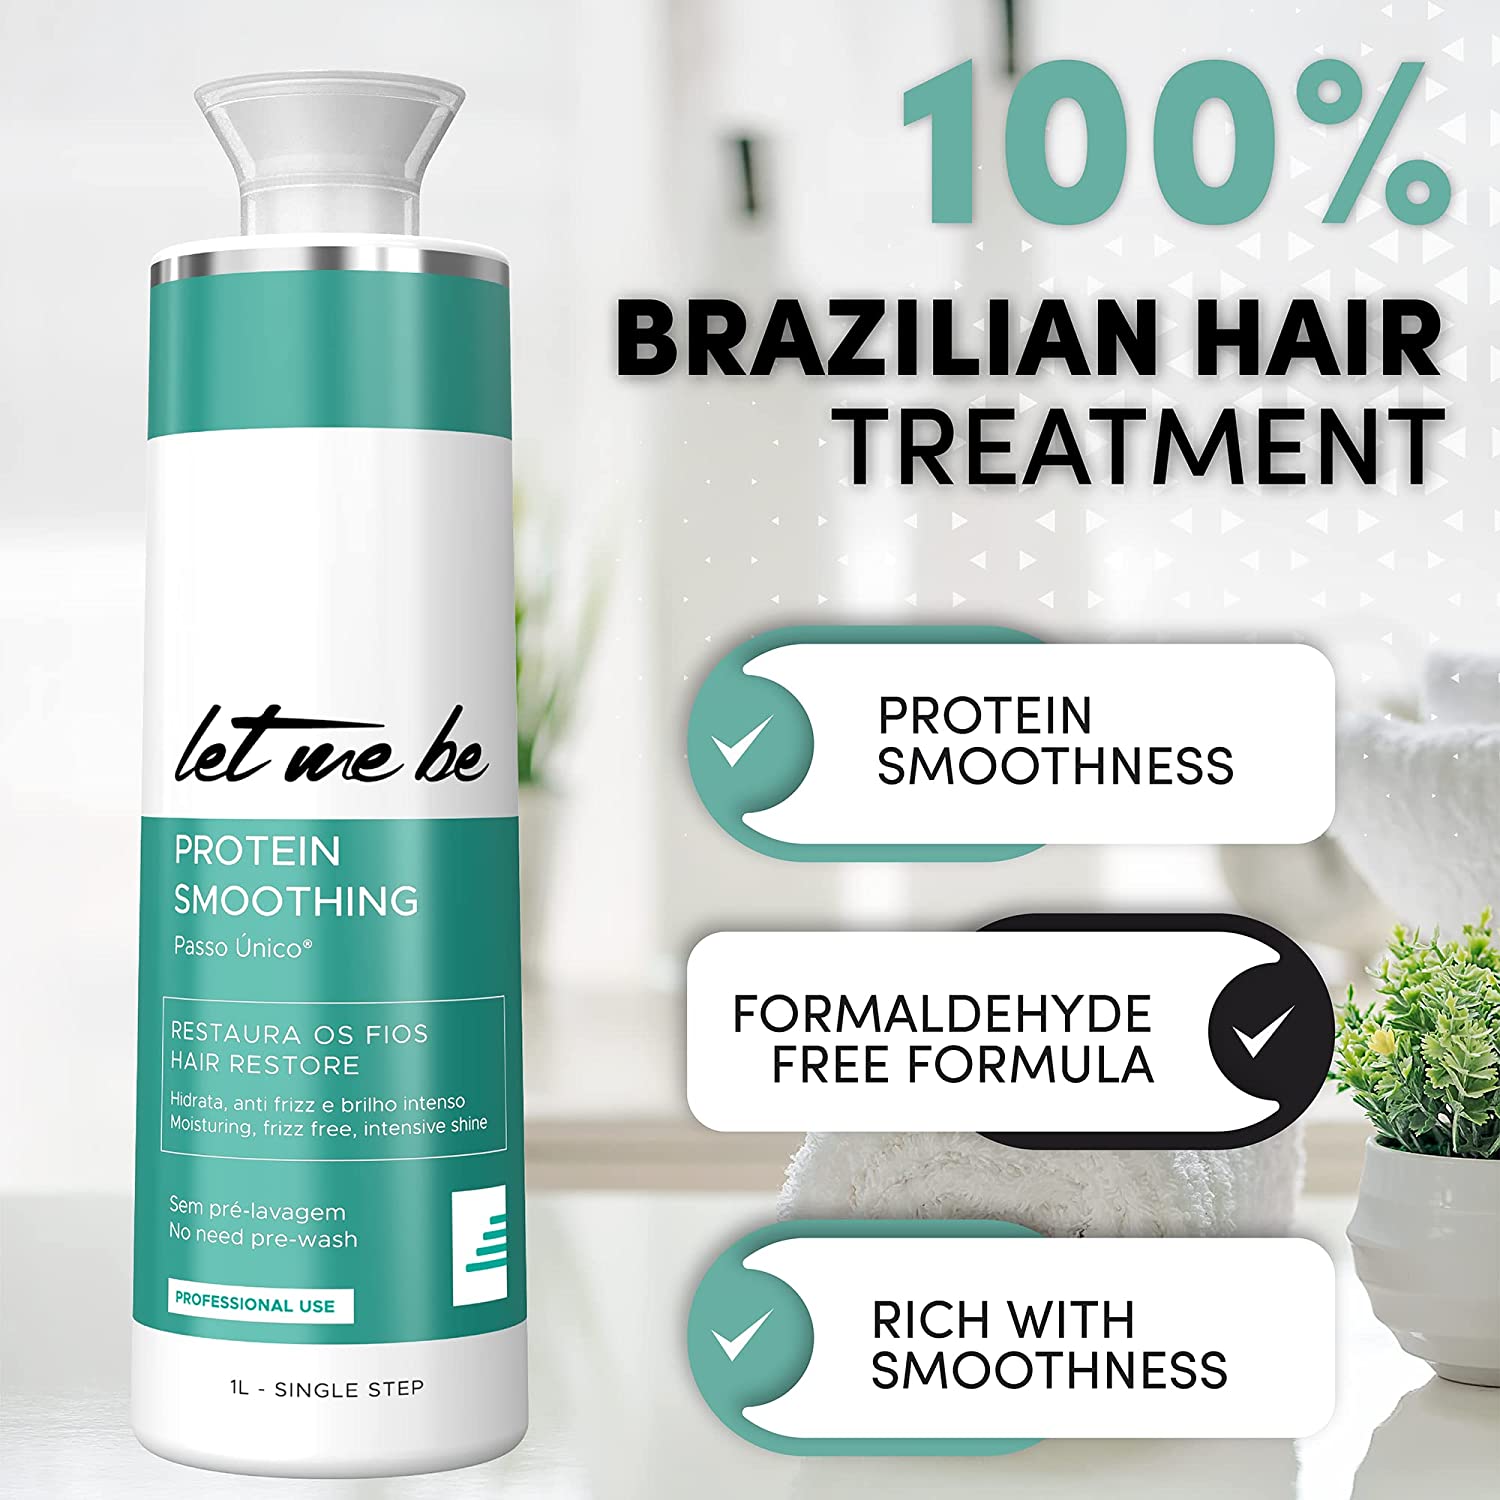 Let Me Be has all the care of your hair, Say goodbye to frizzy hair